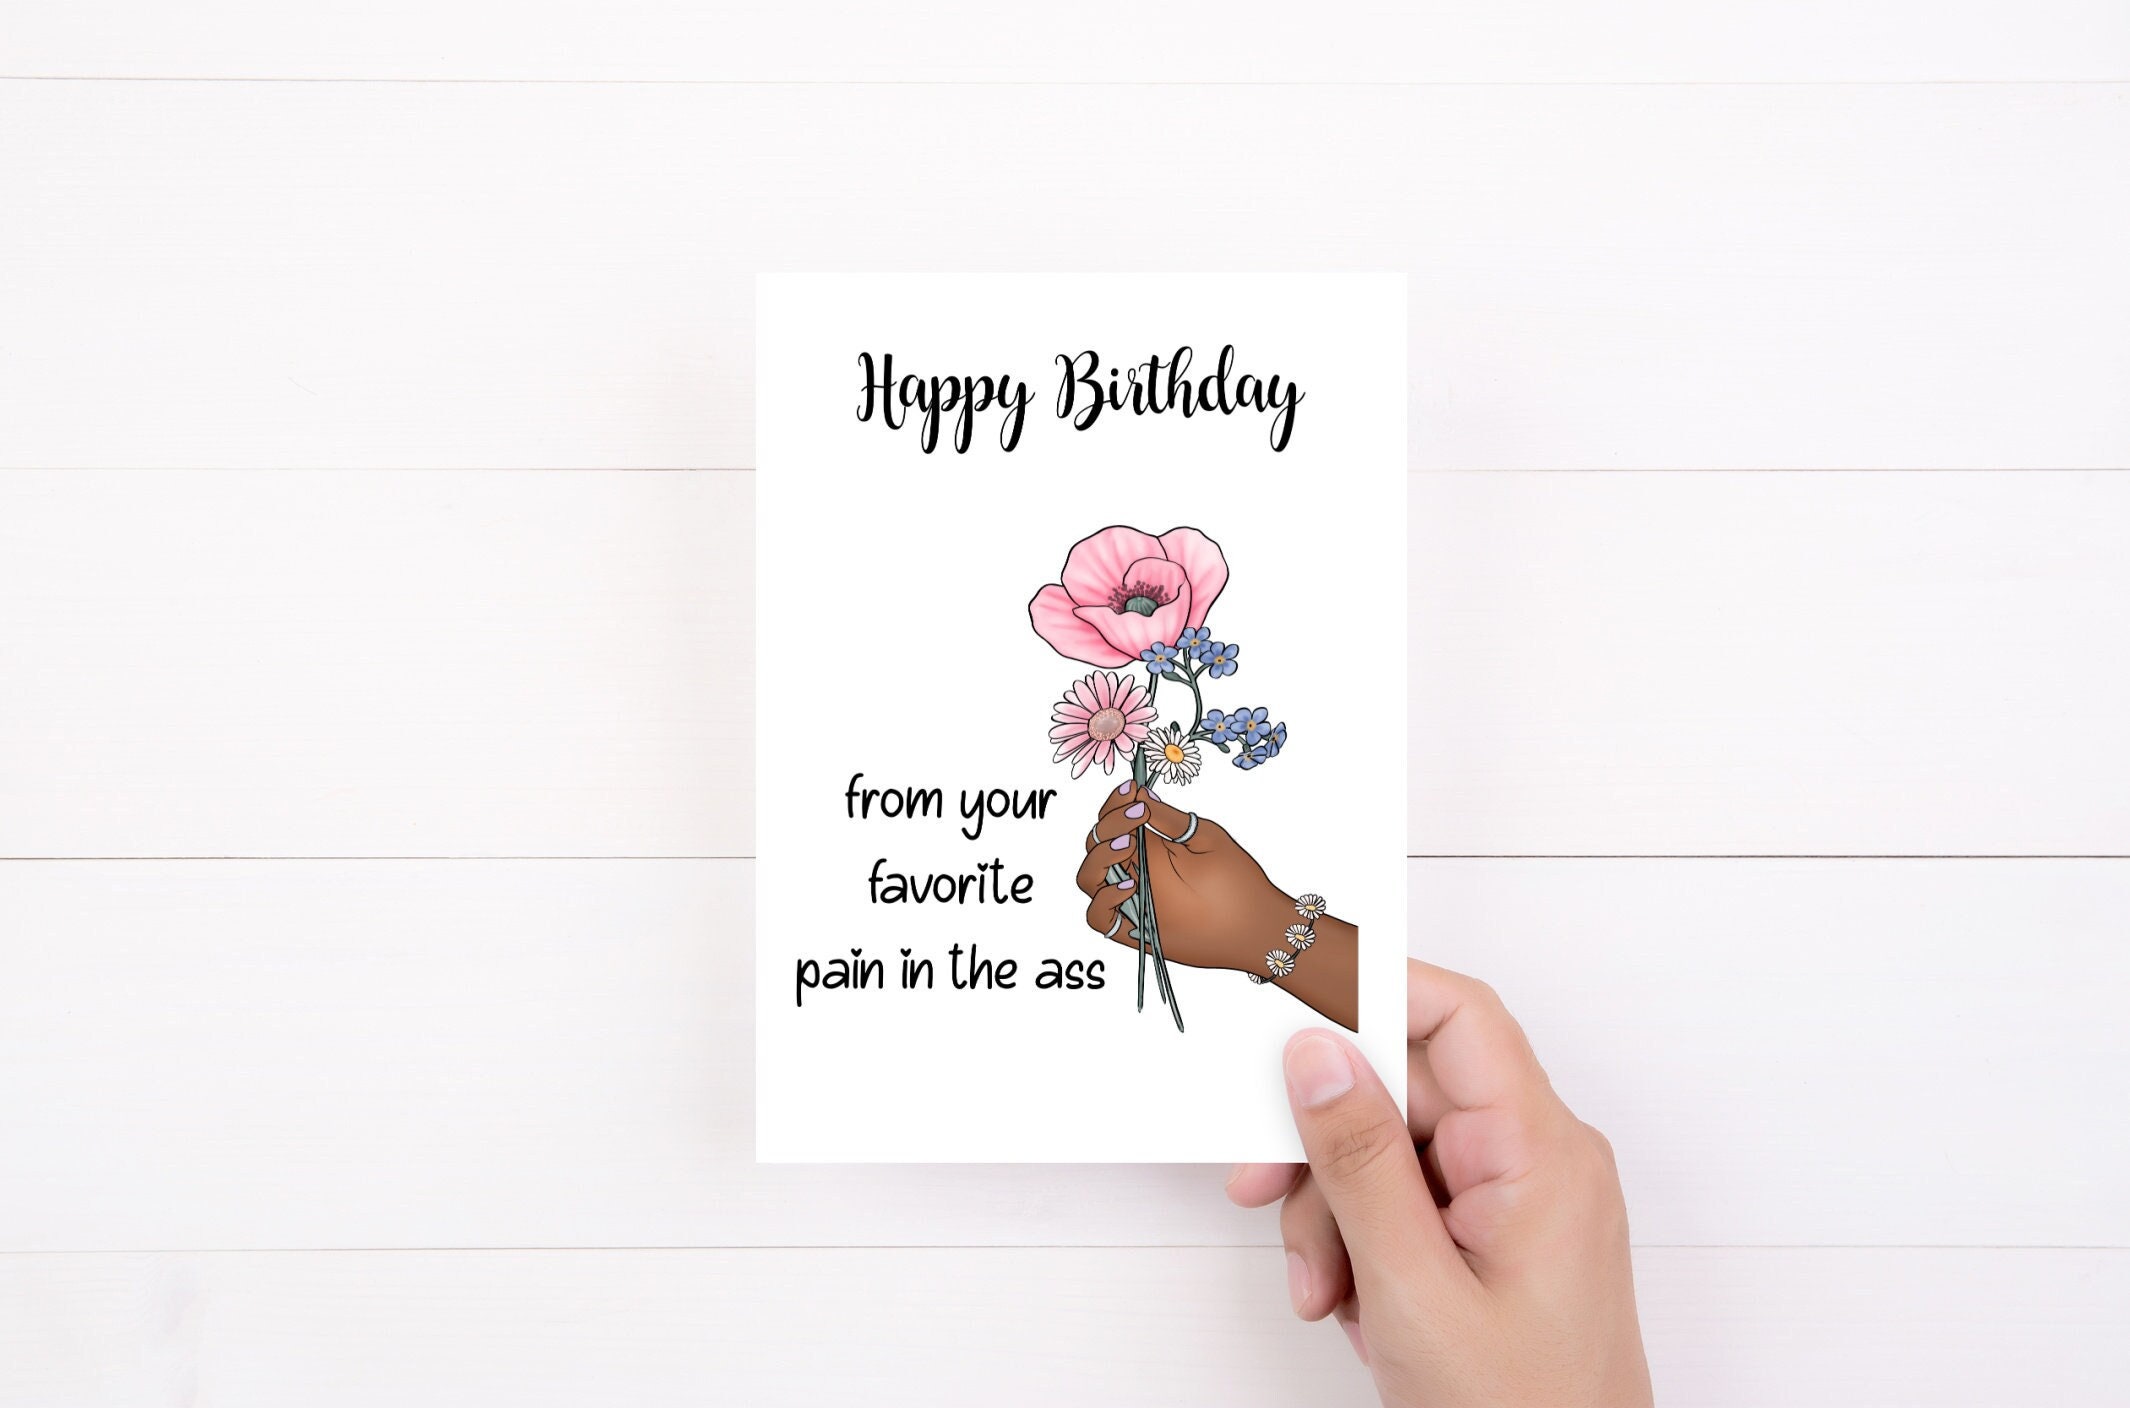 Funny Cards Happy Birthday From Your Favorite Pain in pic